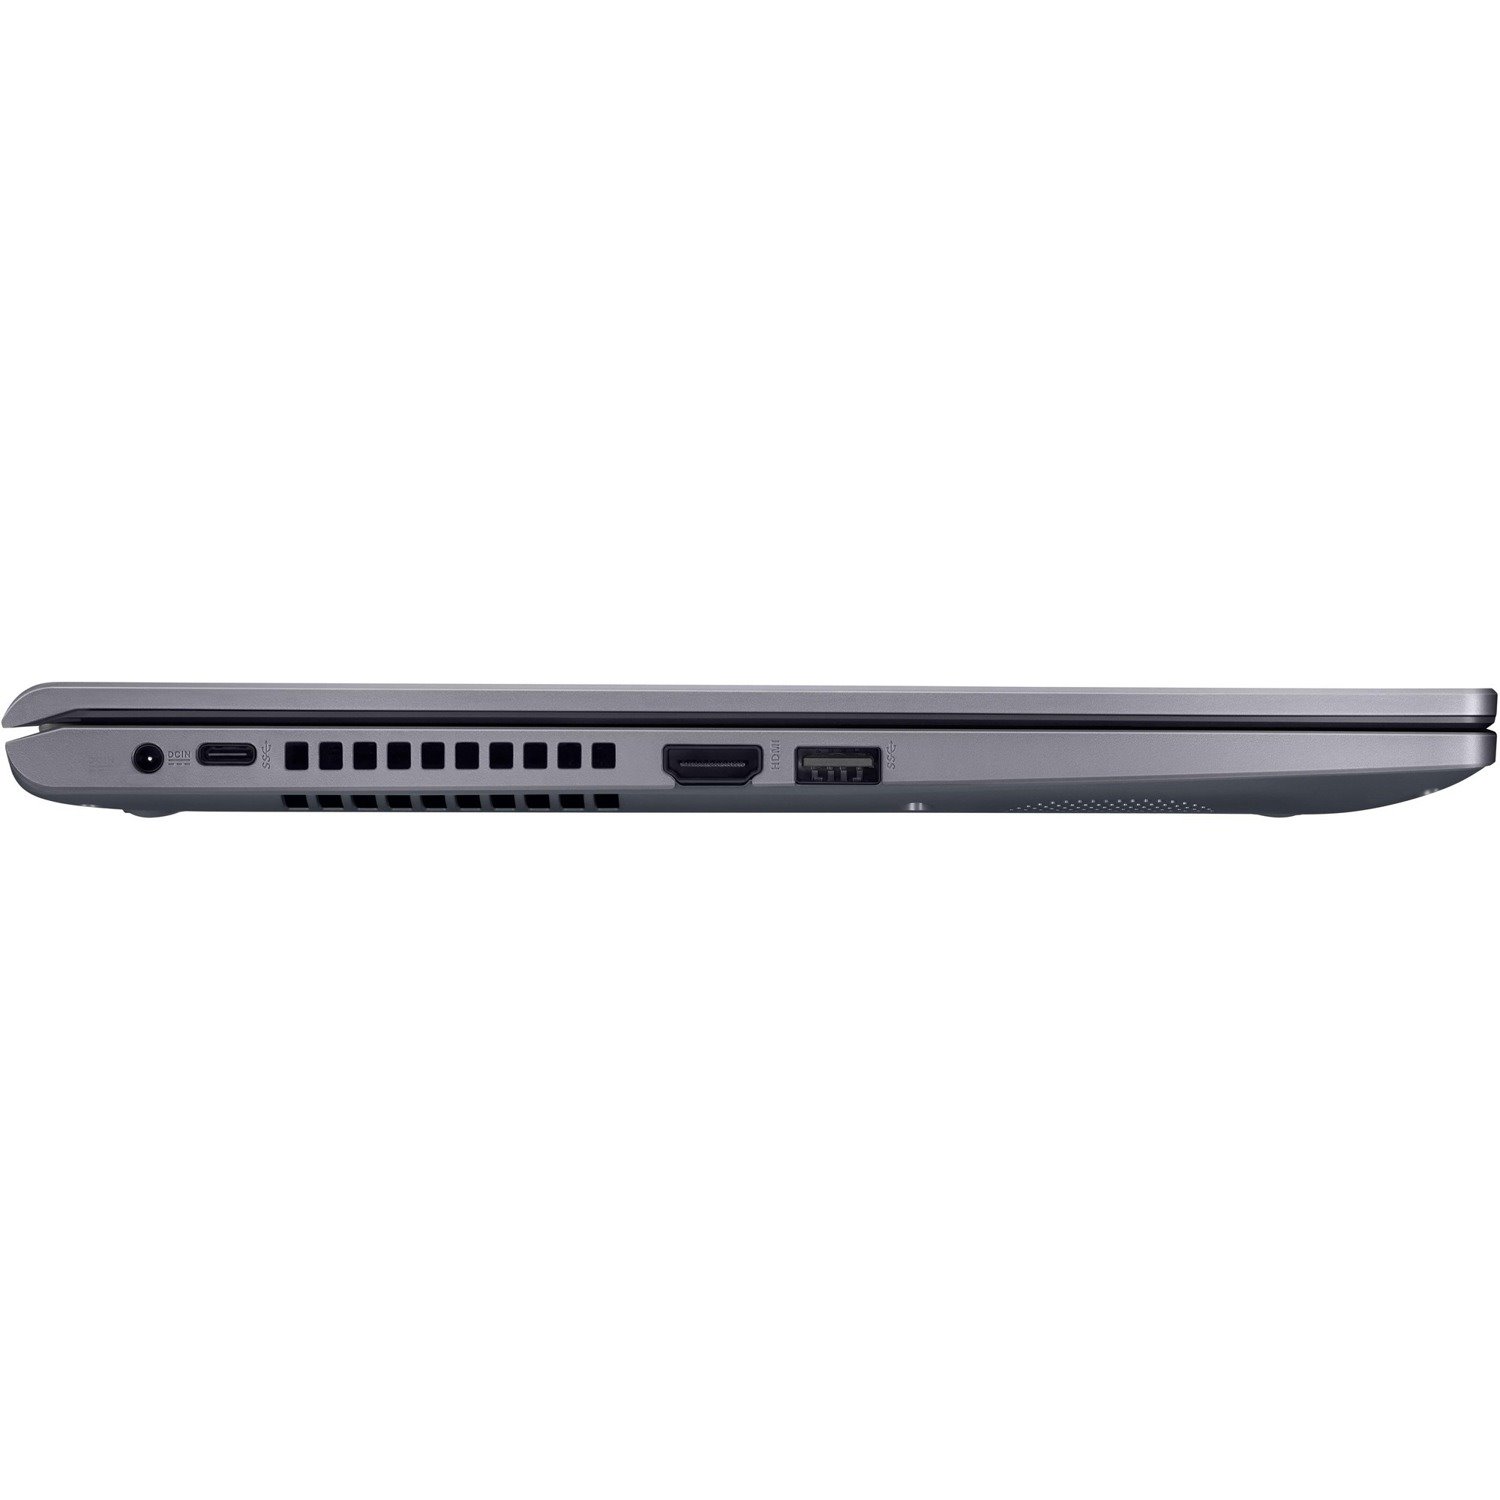 Asus ExpertBook P1512 P1512CEA-XS54 15.6" Notebook - Full HD - 1920 x 1080 - Intel Core i5 11th Gen i5-1135G7 Quad-core (4 Core) 2.40 GHz - 8 GB Total RAM - 8 GB On-board Memory - 512 GB SSD - Slate Gray